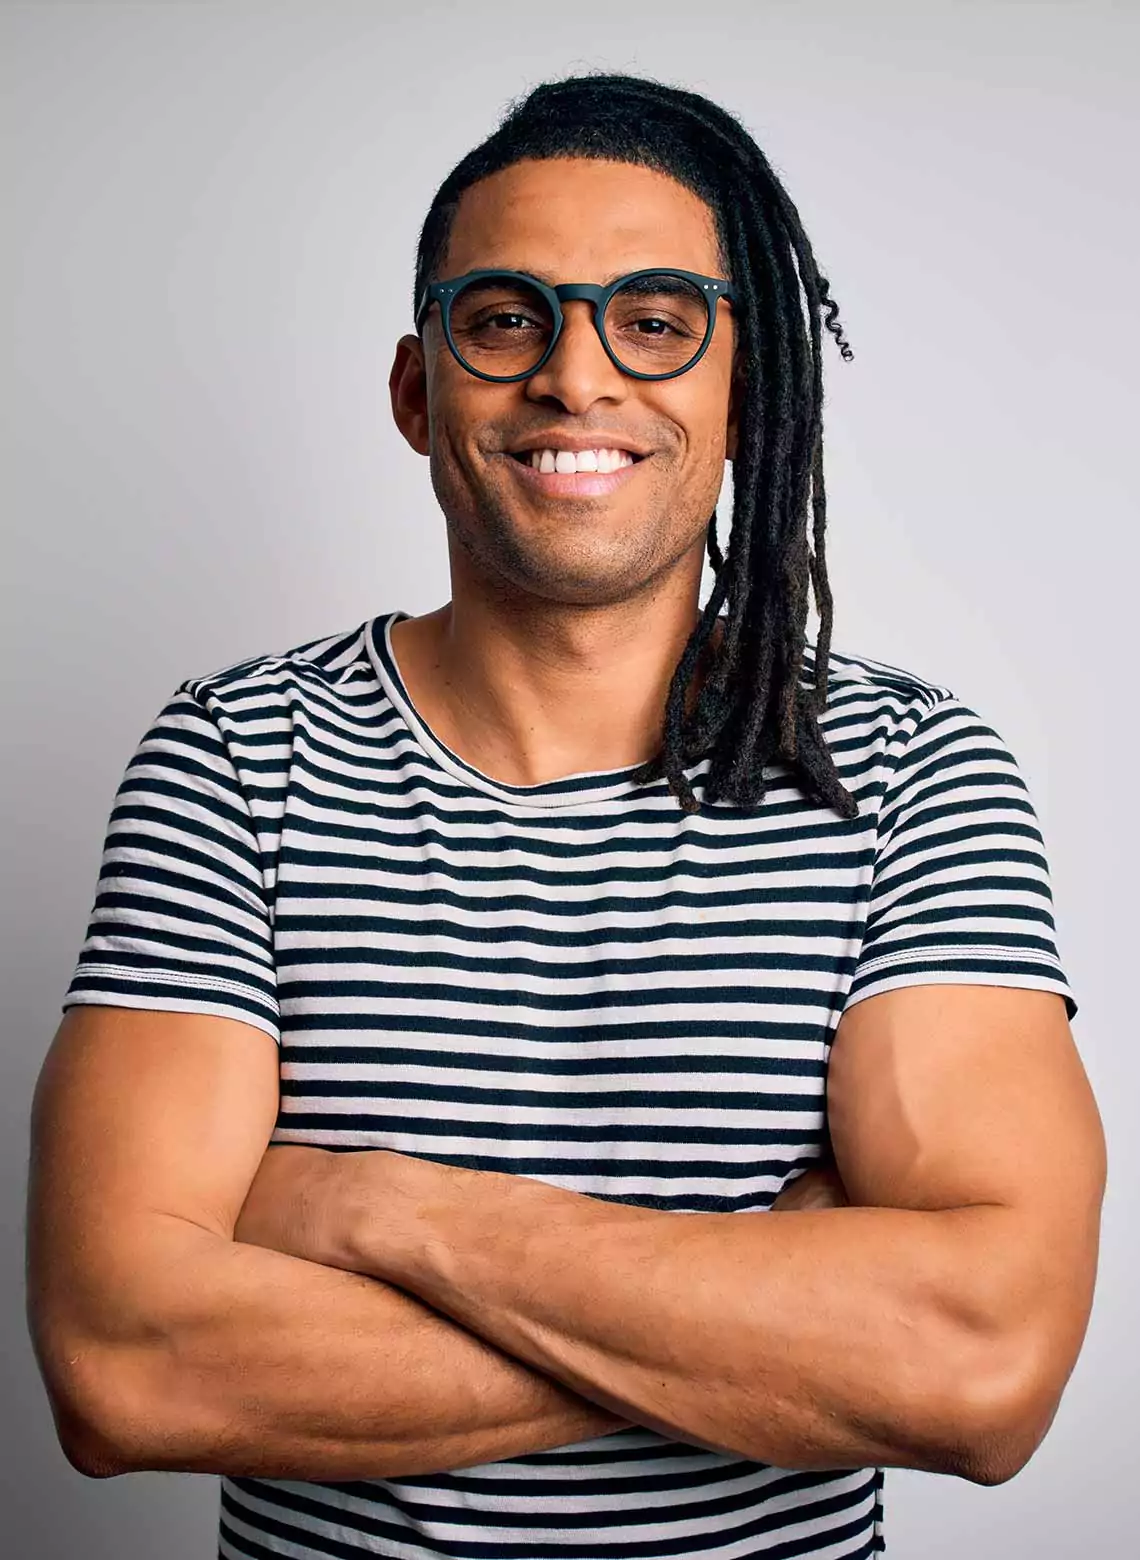 Image of man with side-swept locs.